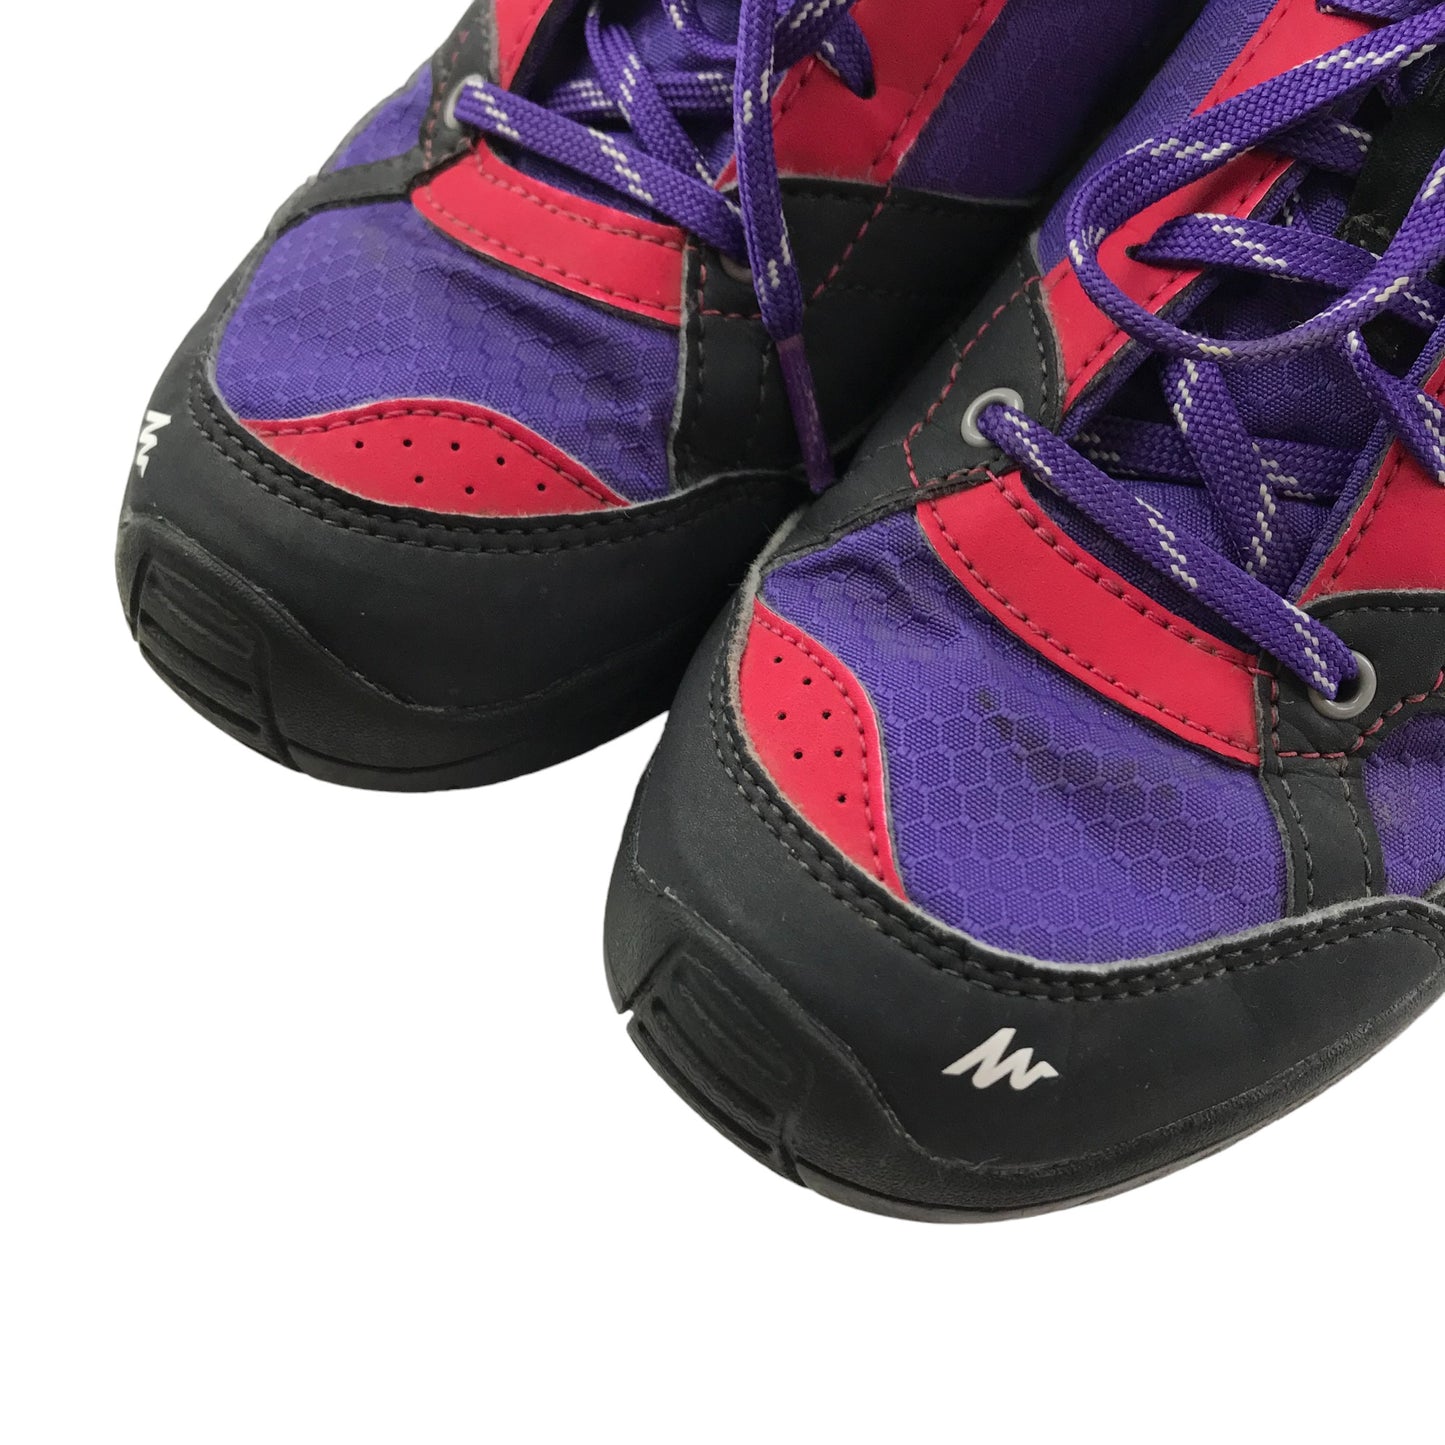 Decathlon Walking Shoes Shoe Size 4 Purple and Pink Novadry with Laces